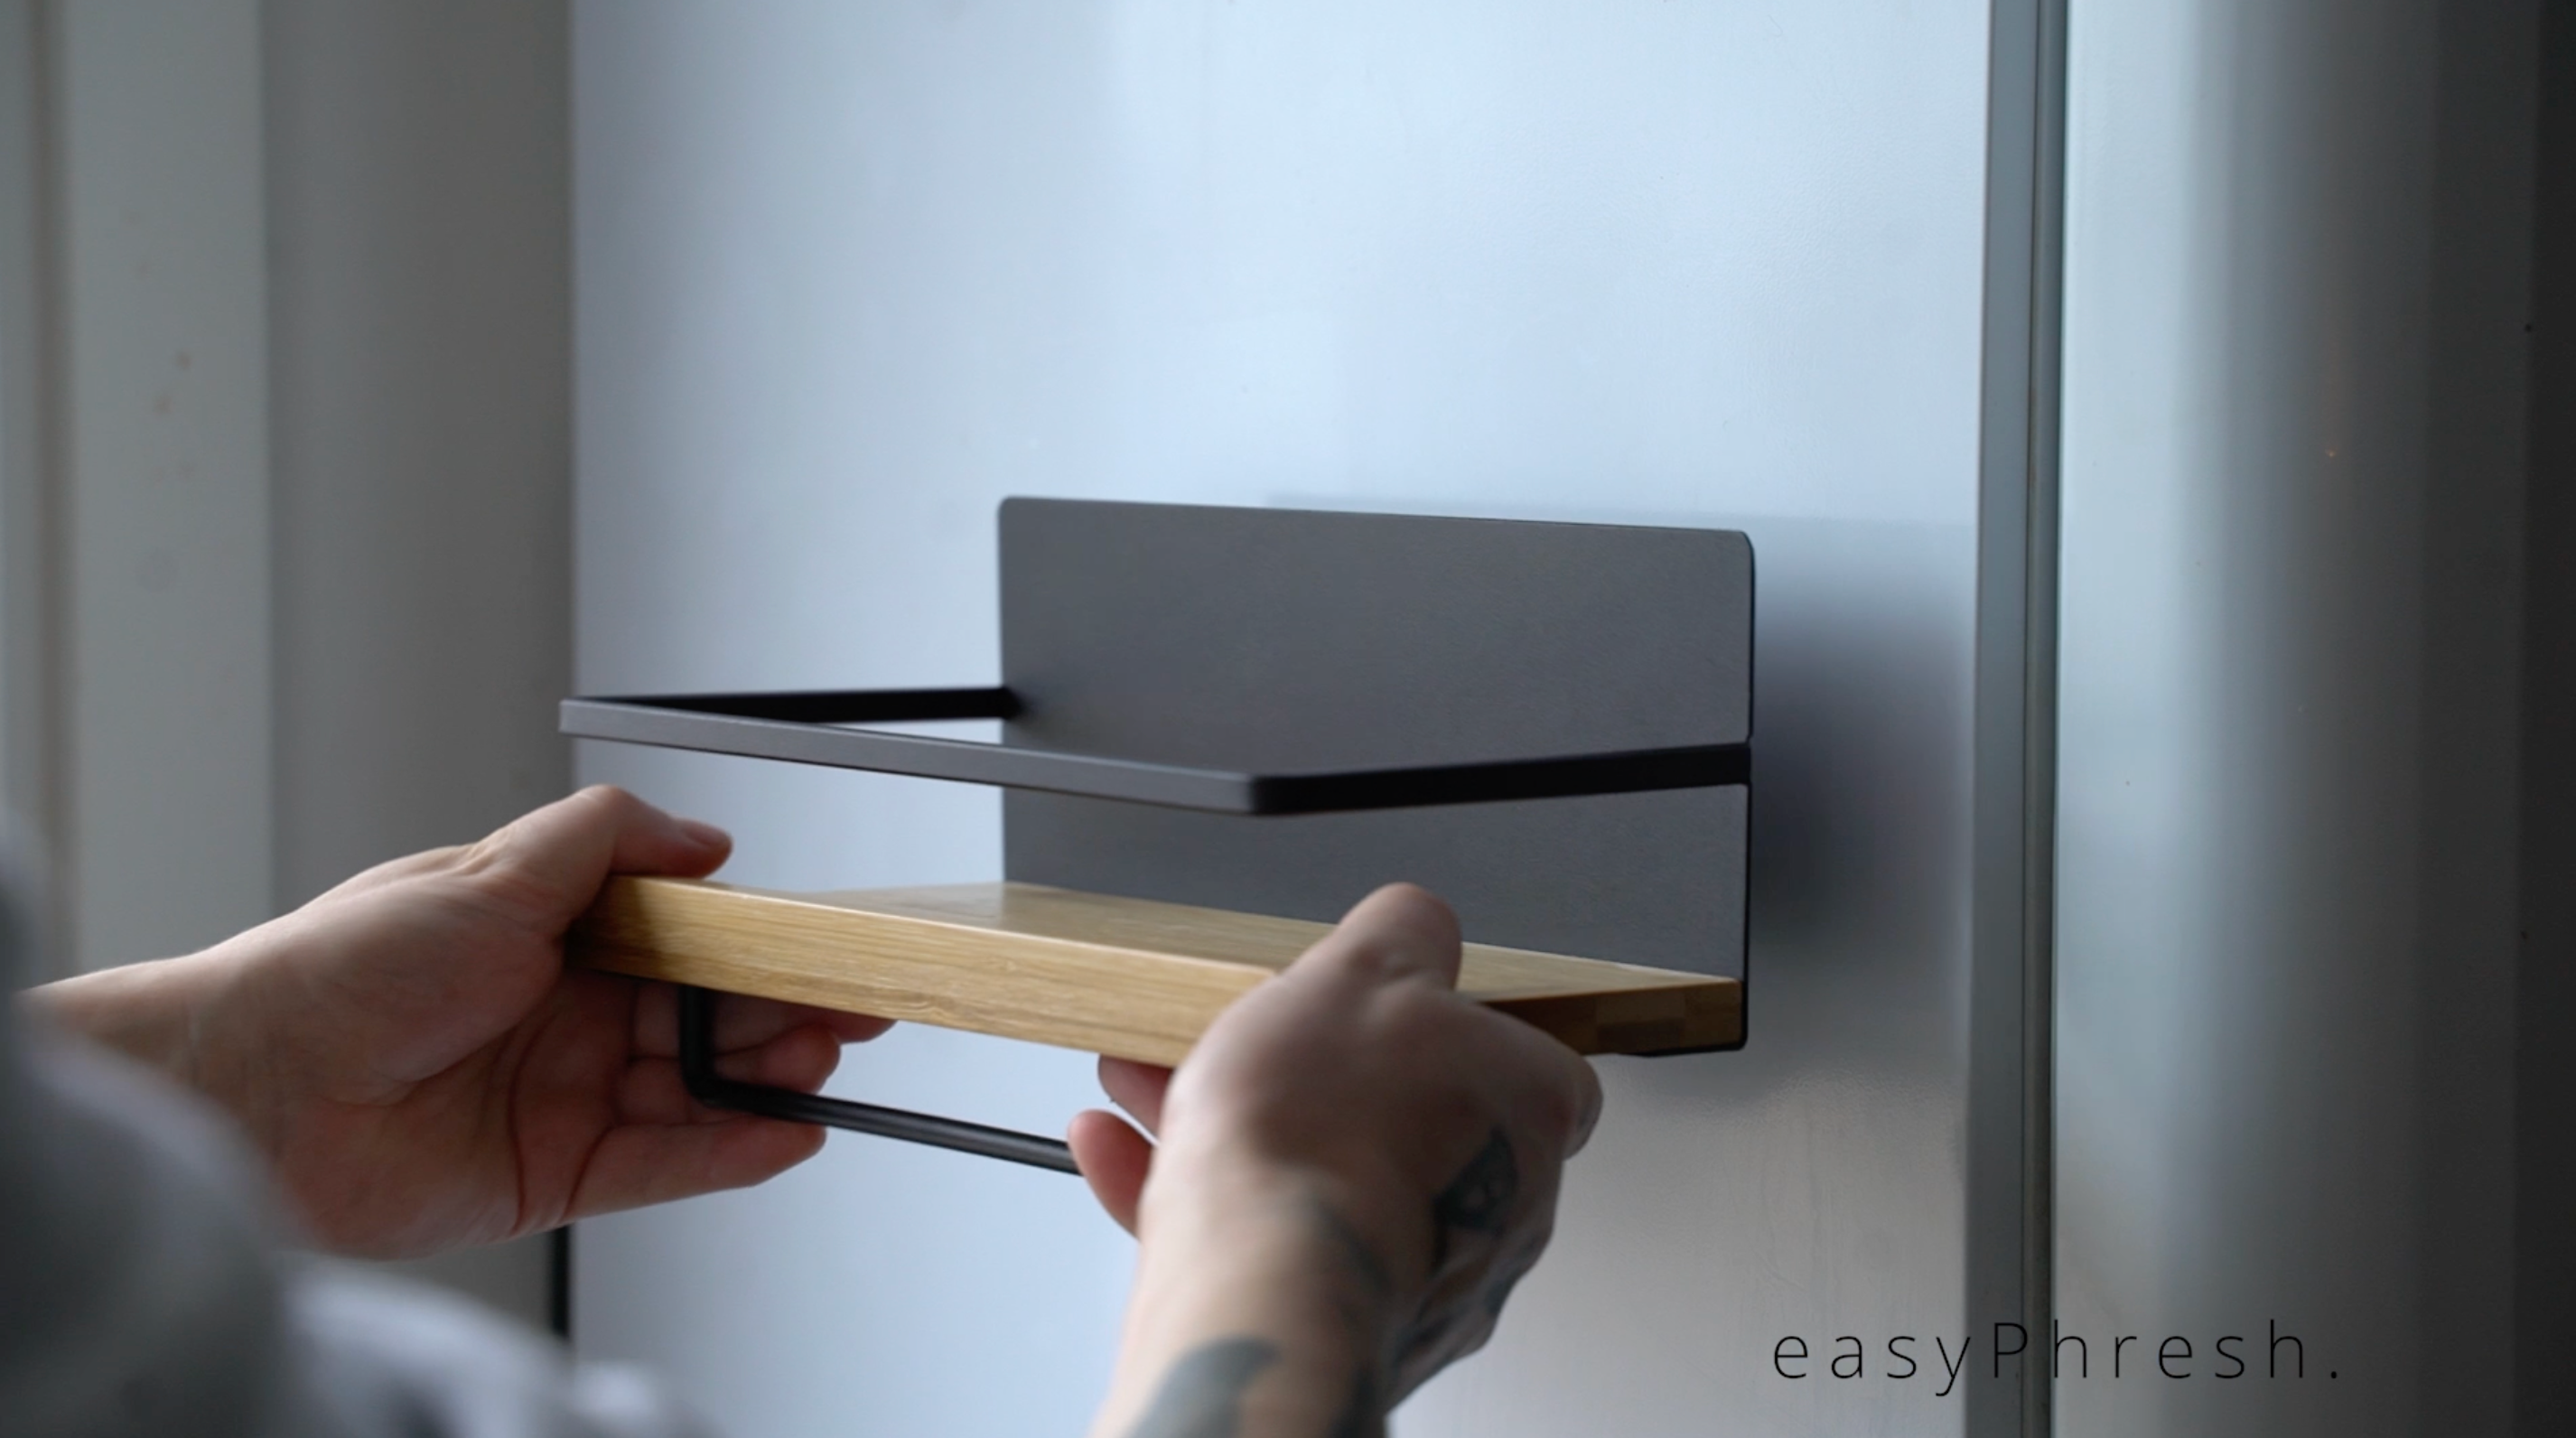 Load video: Video showing how to use the easyPhresh Magnetic Shelf